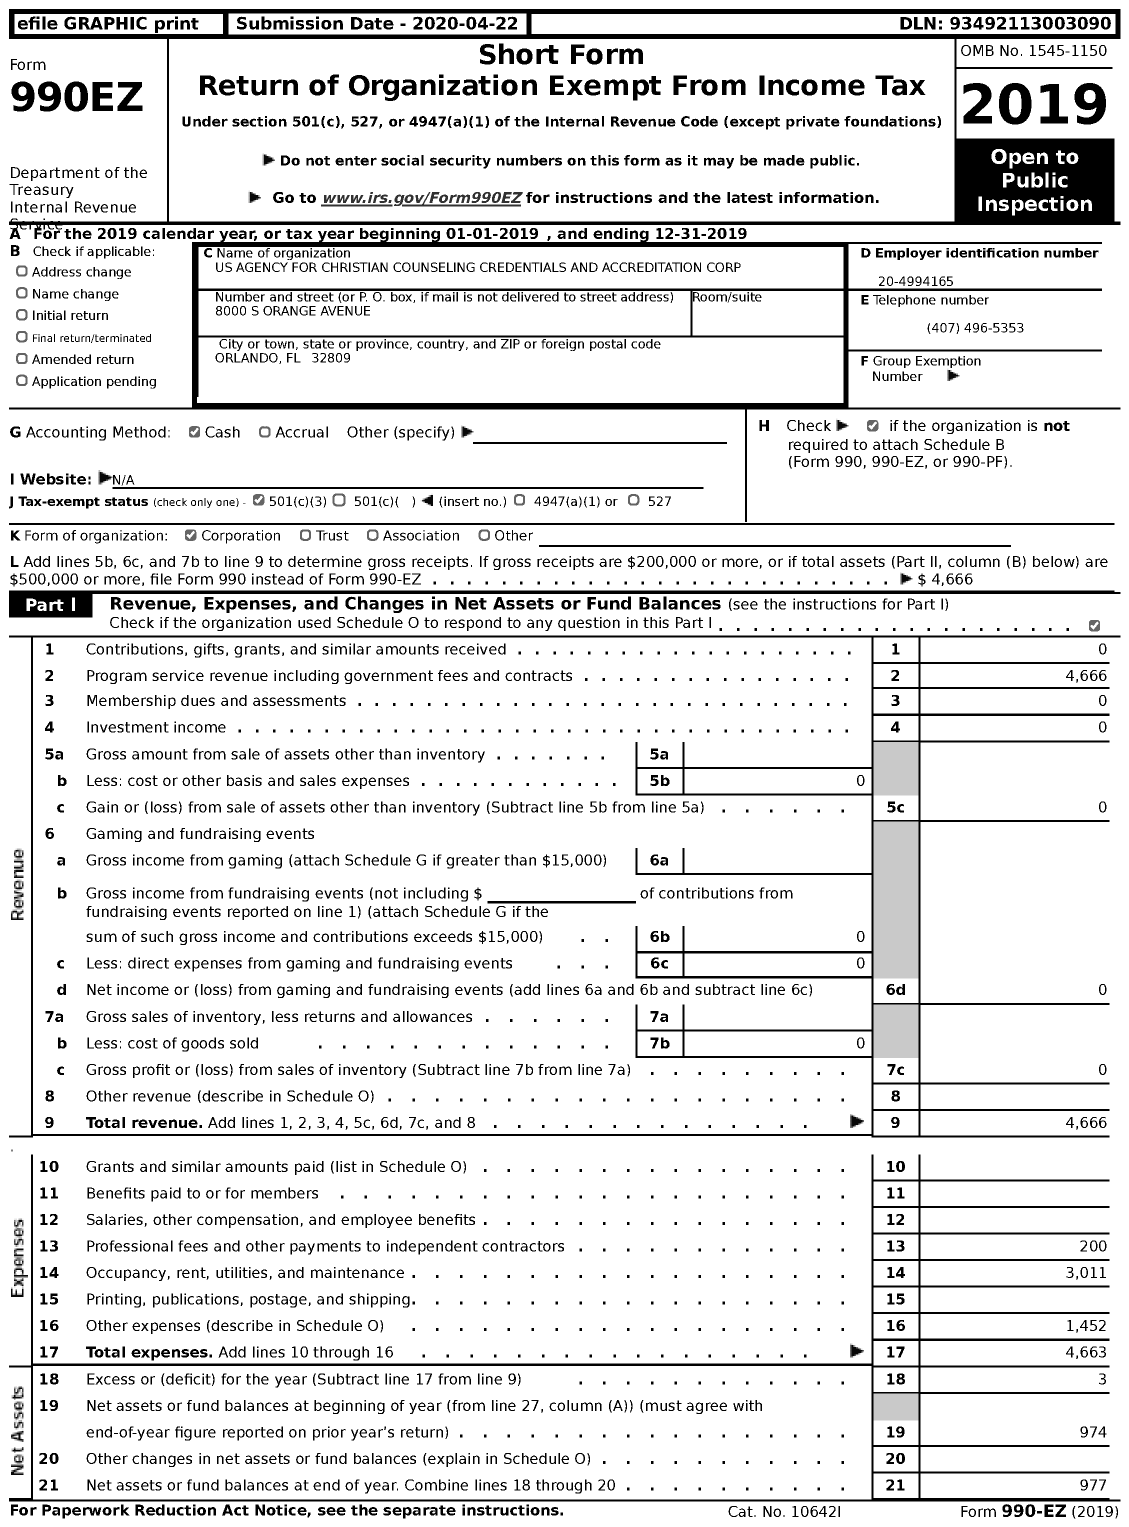 Image of first page of 2019 Form 990EZ for Us Agency for Christian Counseling Credentials and Accreditation Corporation